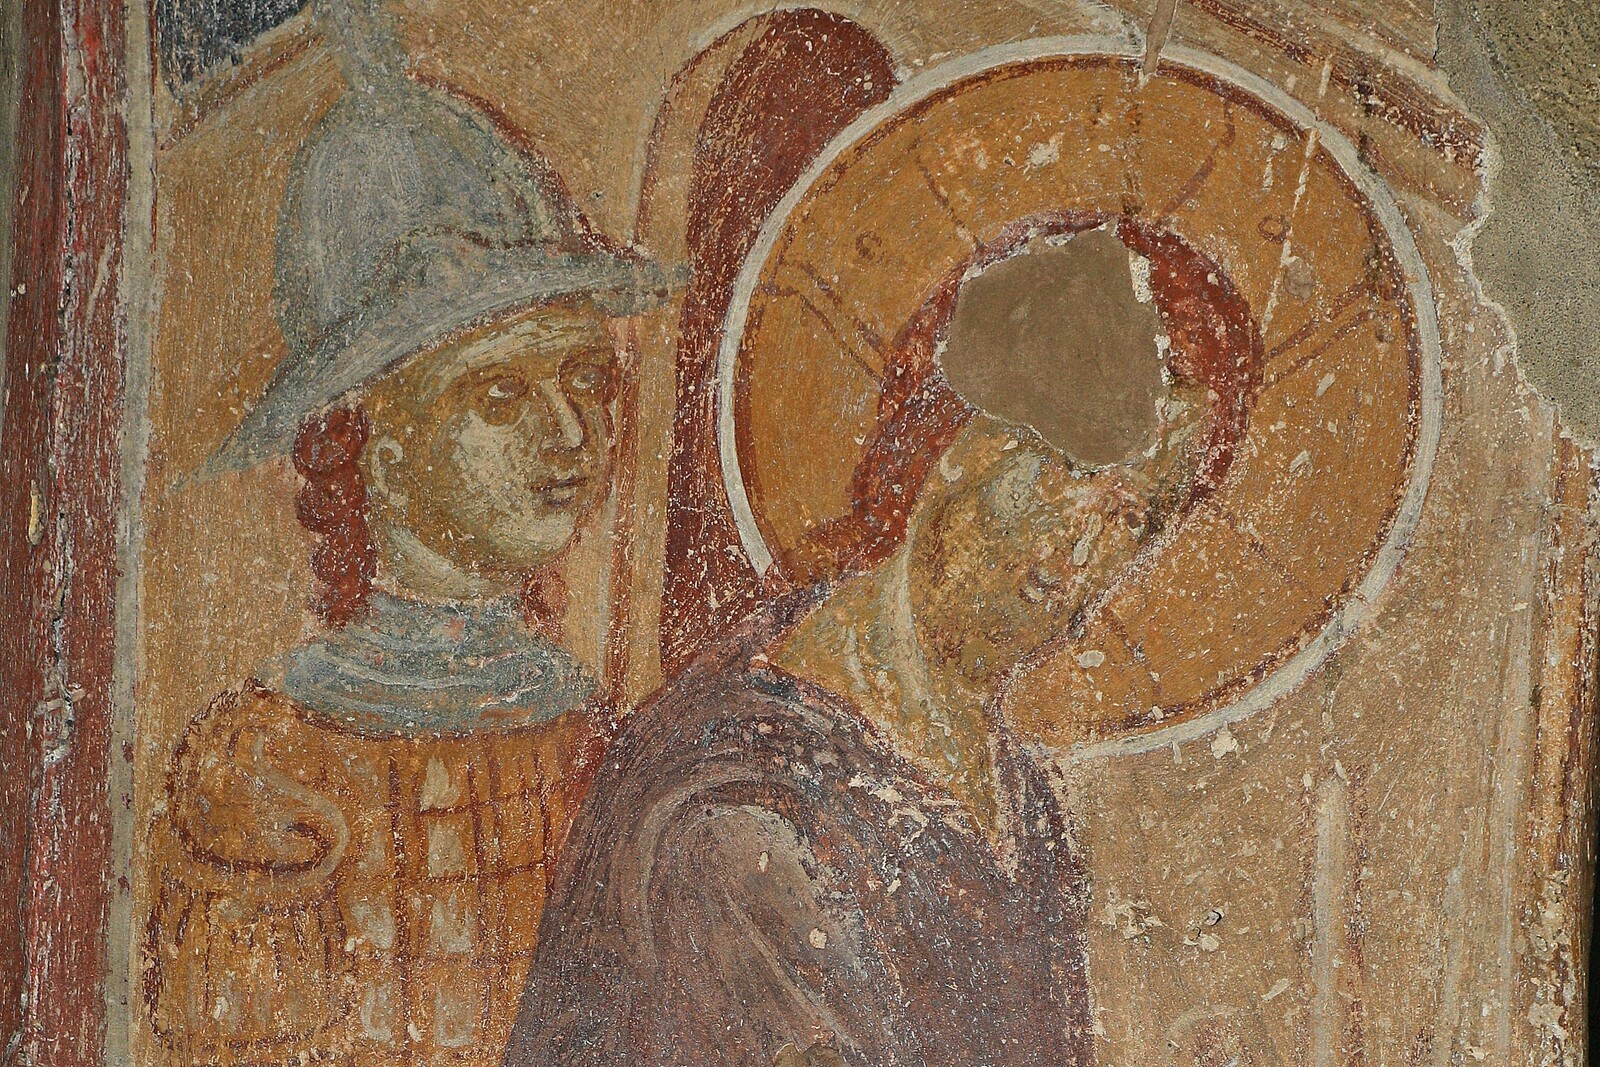 Christ before Annas and Caiaphas, detail